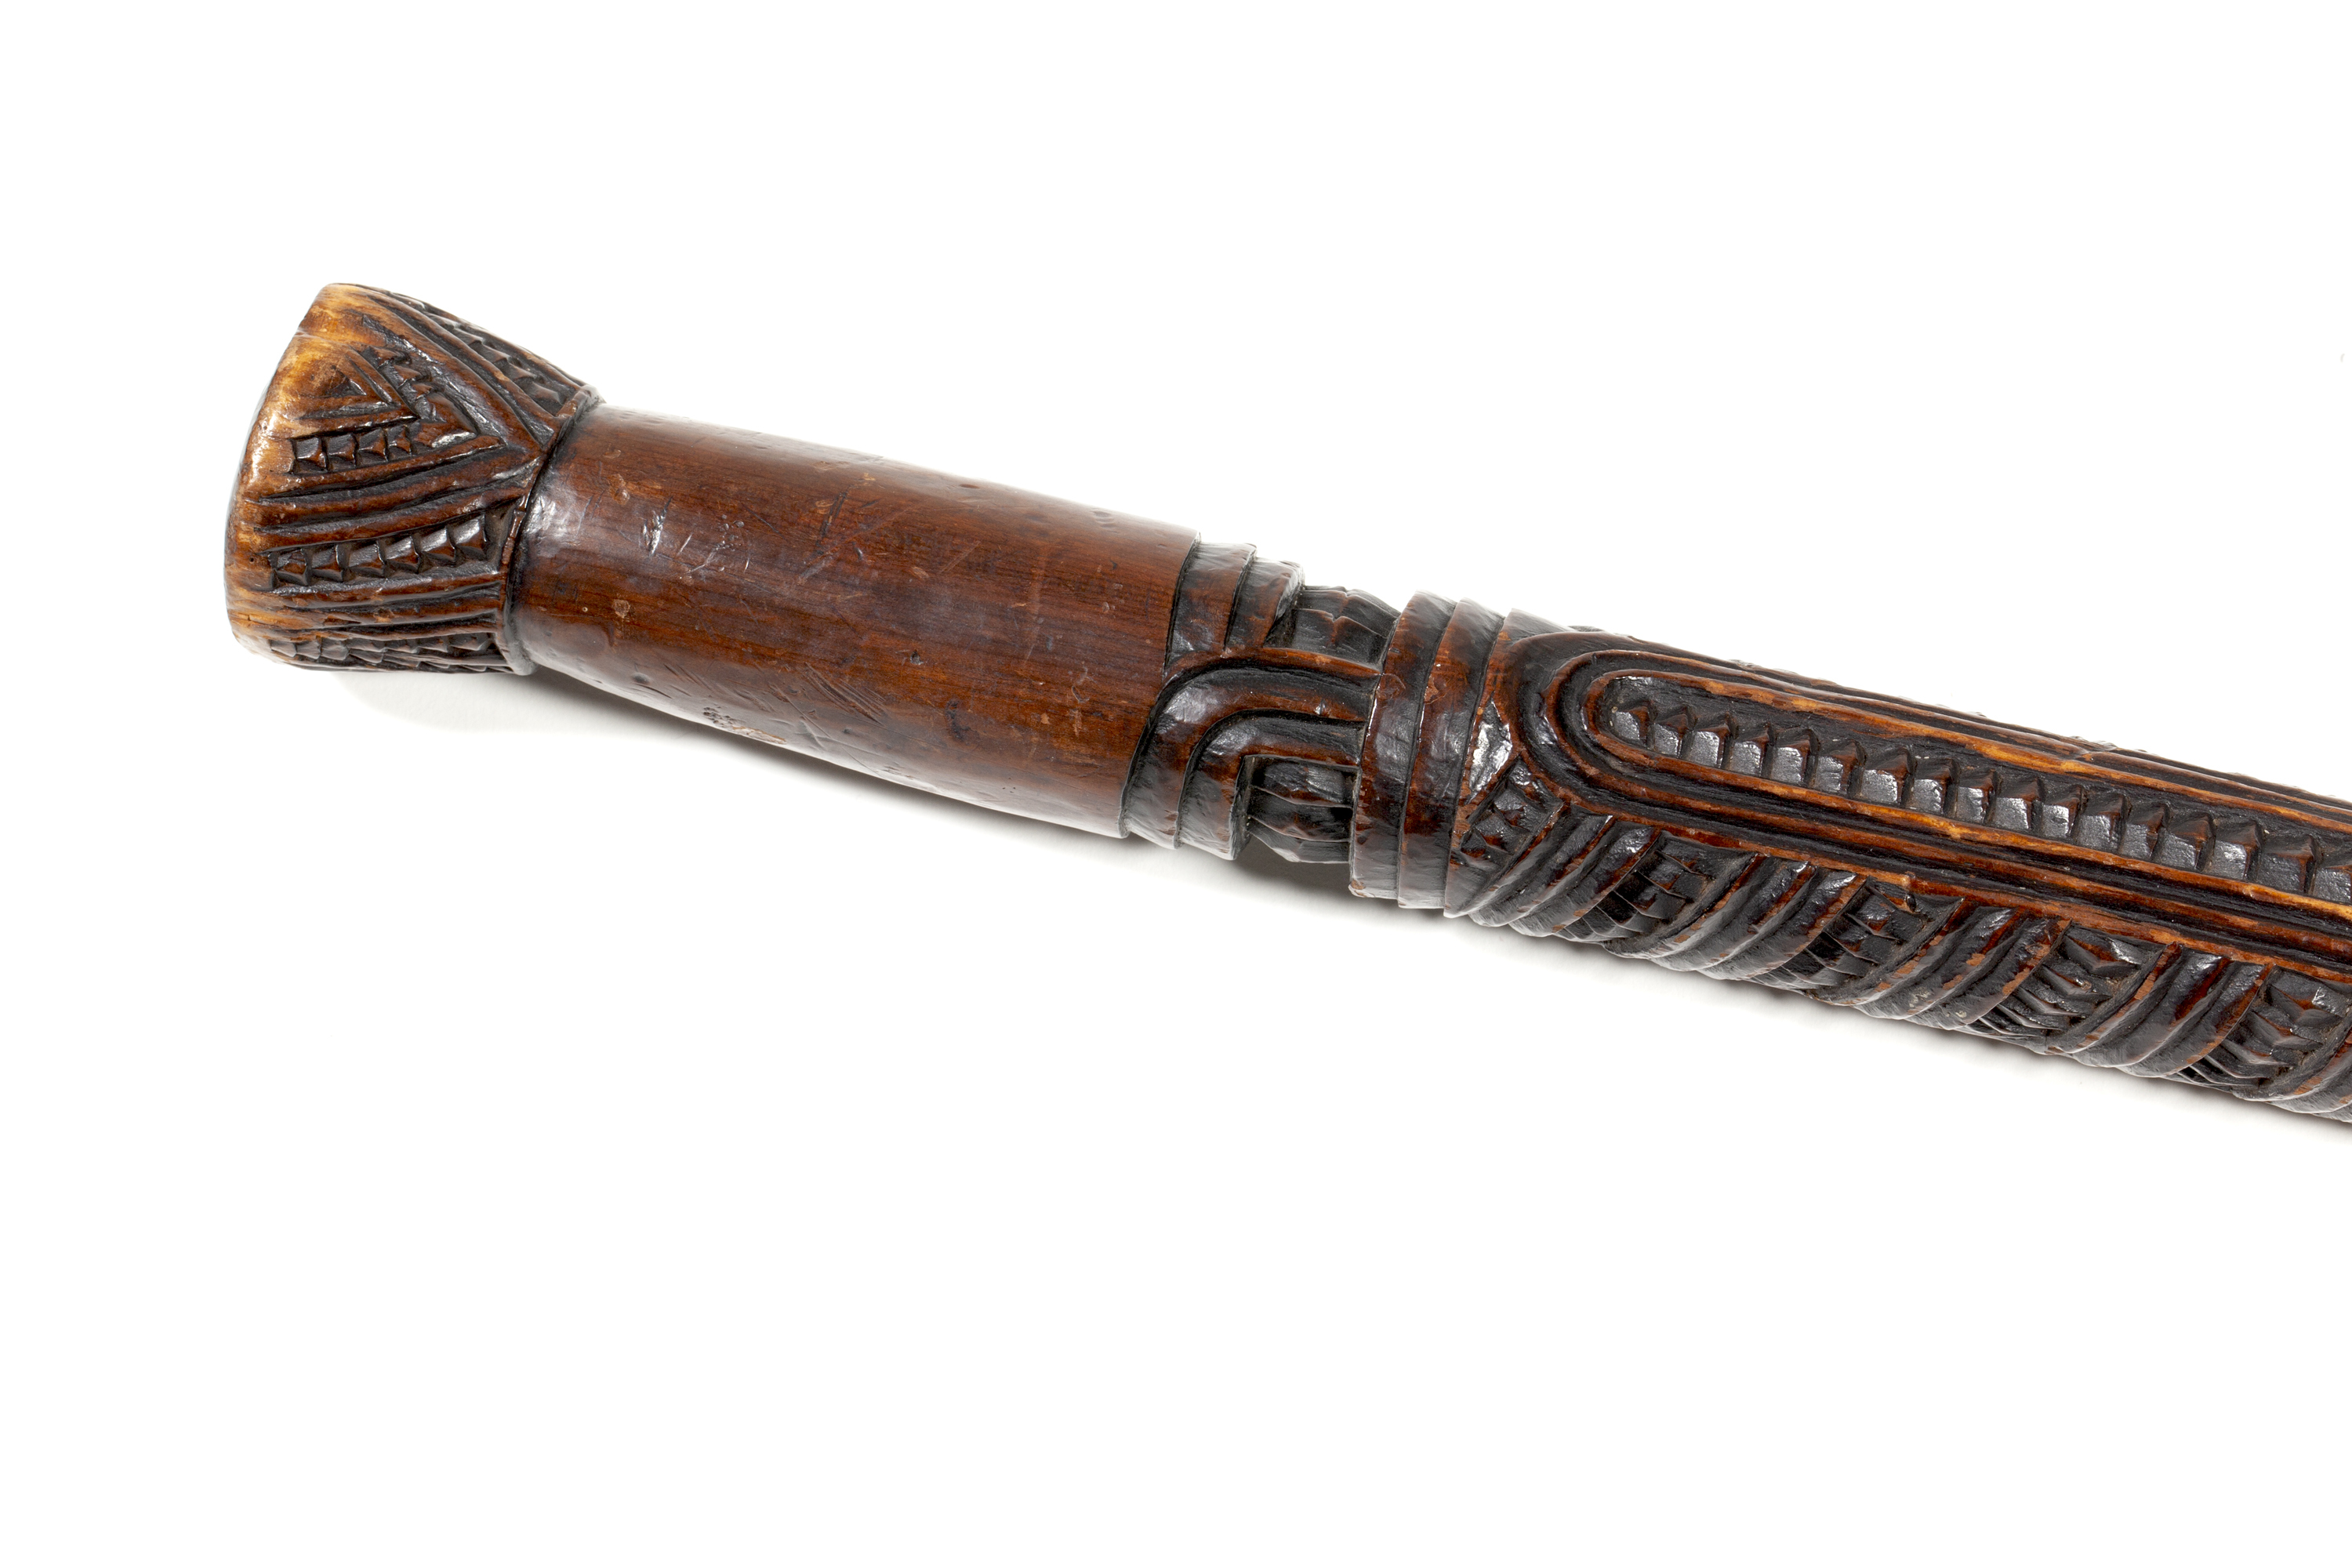 The head of the tokotoko, showing the finely carved rauponga which represent the ribs of ancestors. As it would be unusual to gift a taiaha to a woman, this tokotoko may be the “taiaha” gifted to Eliza Jones by Wiremu Tāmihana in 1858. Canterbury Museum 2020.90.1